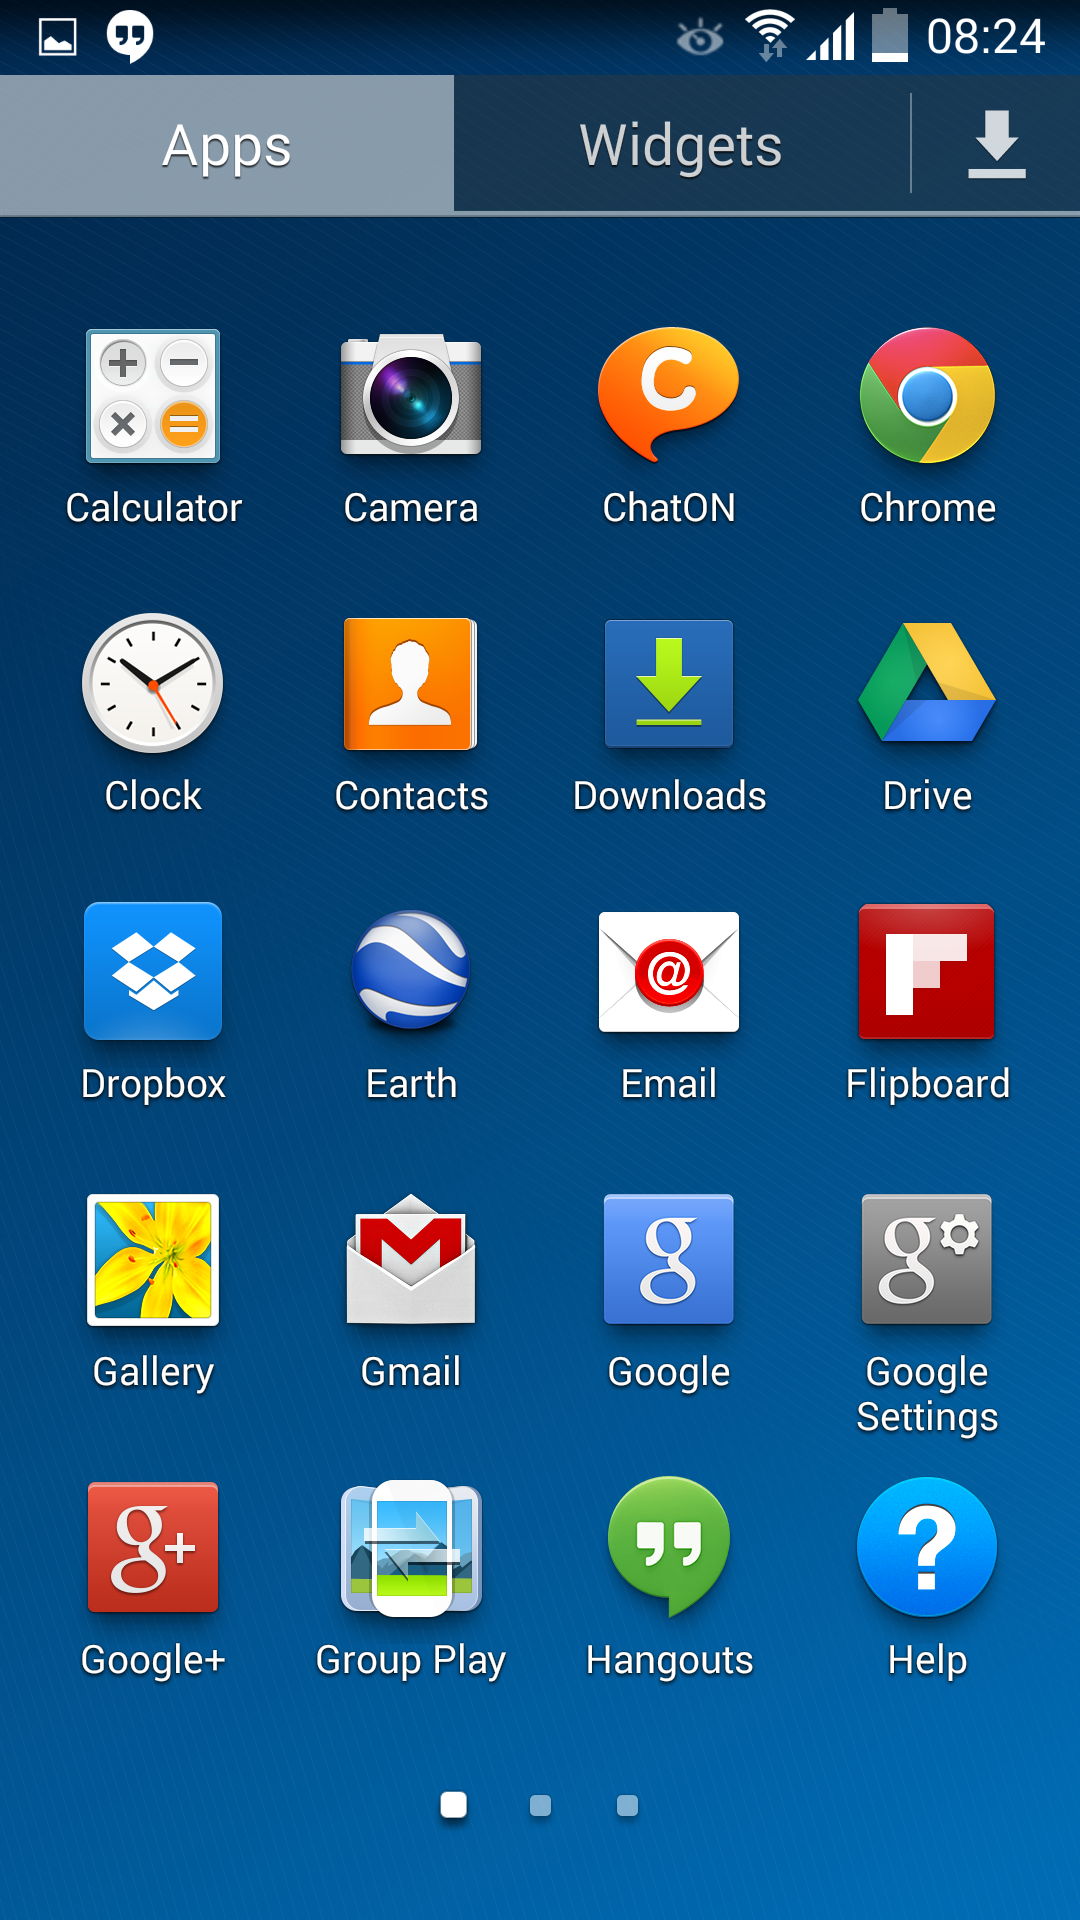 apk apps for android 4.4.2 download